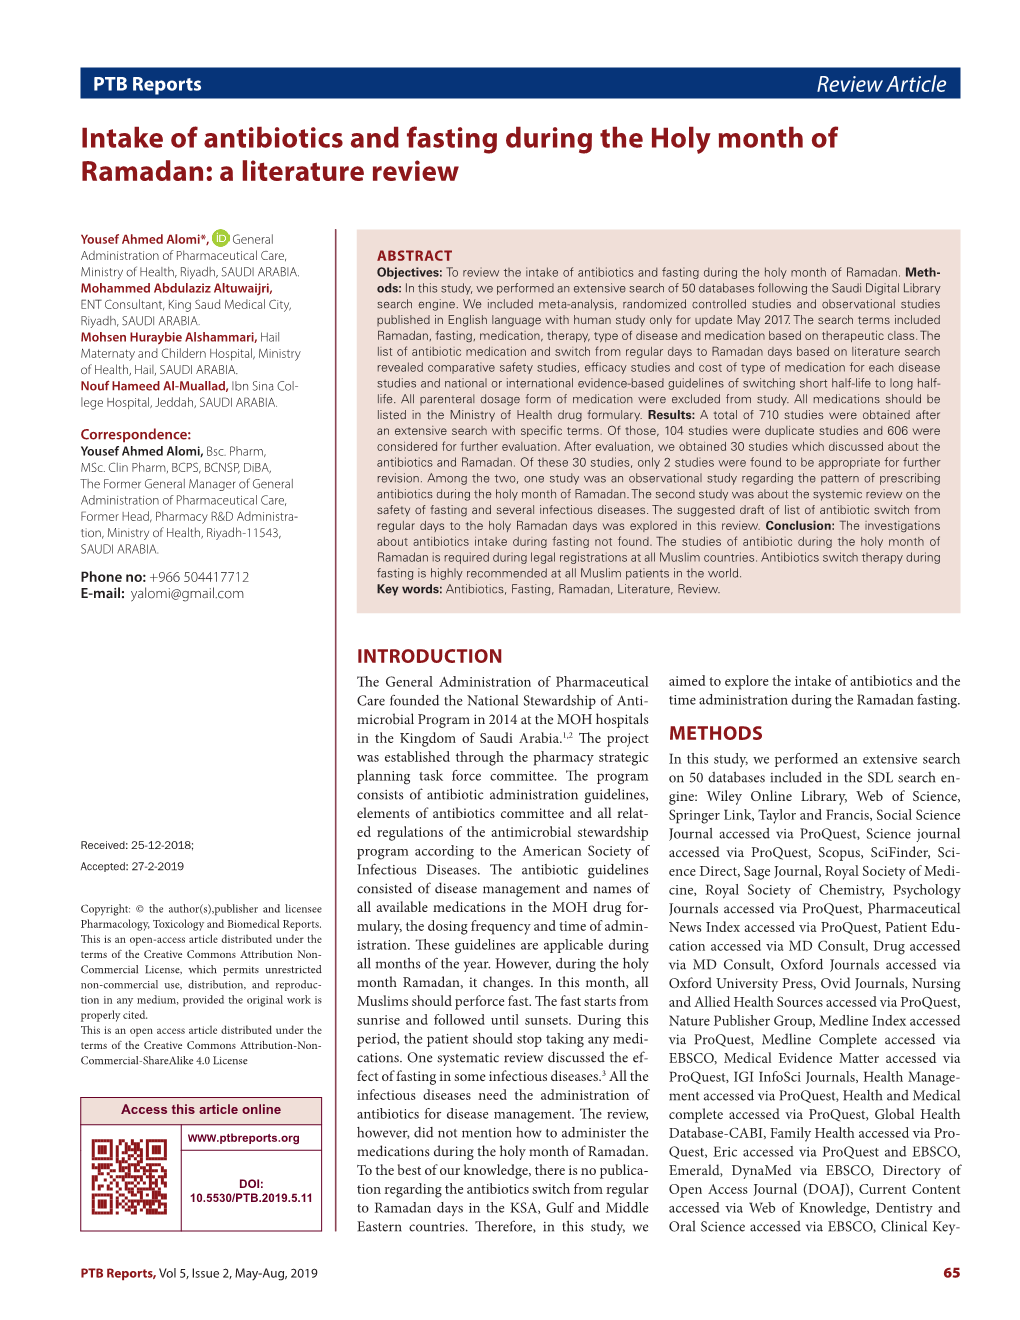 Intake of Antibiotics and Fasting During the Holy Month of Ramadan: a Literature Review